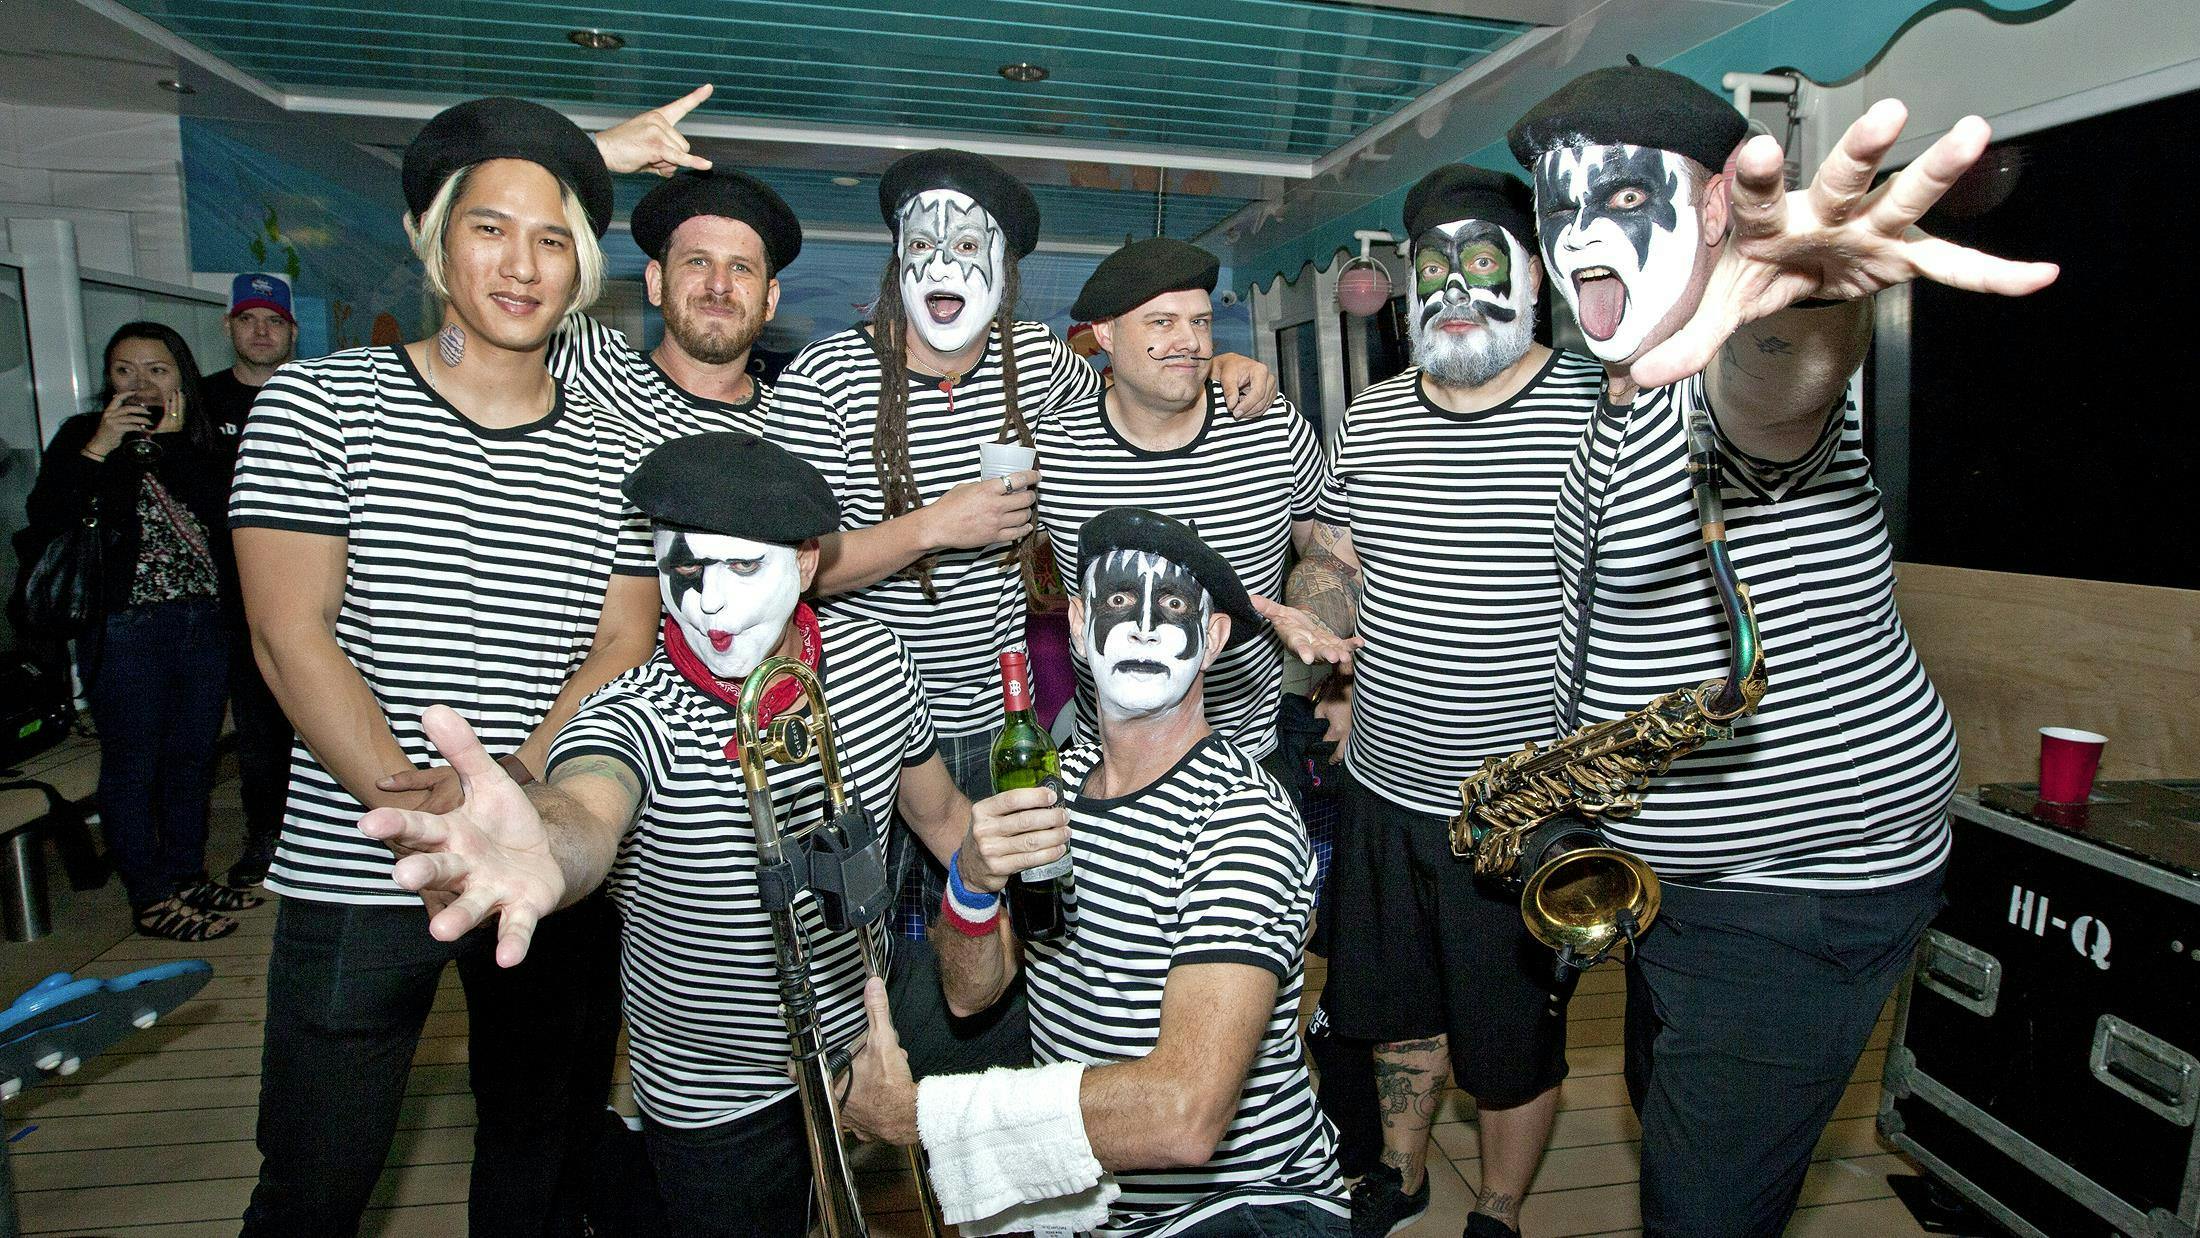 Less Than Jake and crew transform into French Kiss for their performance.